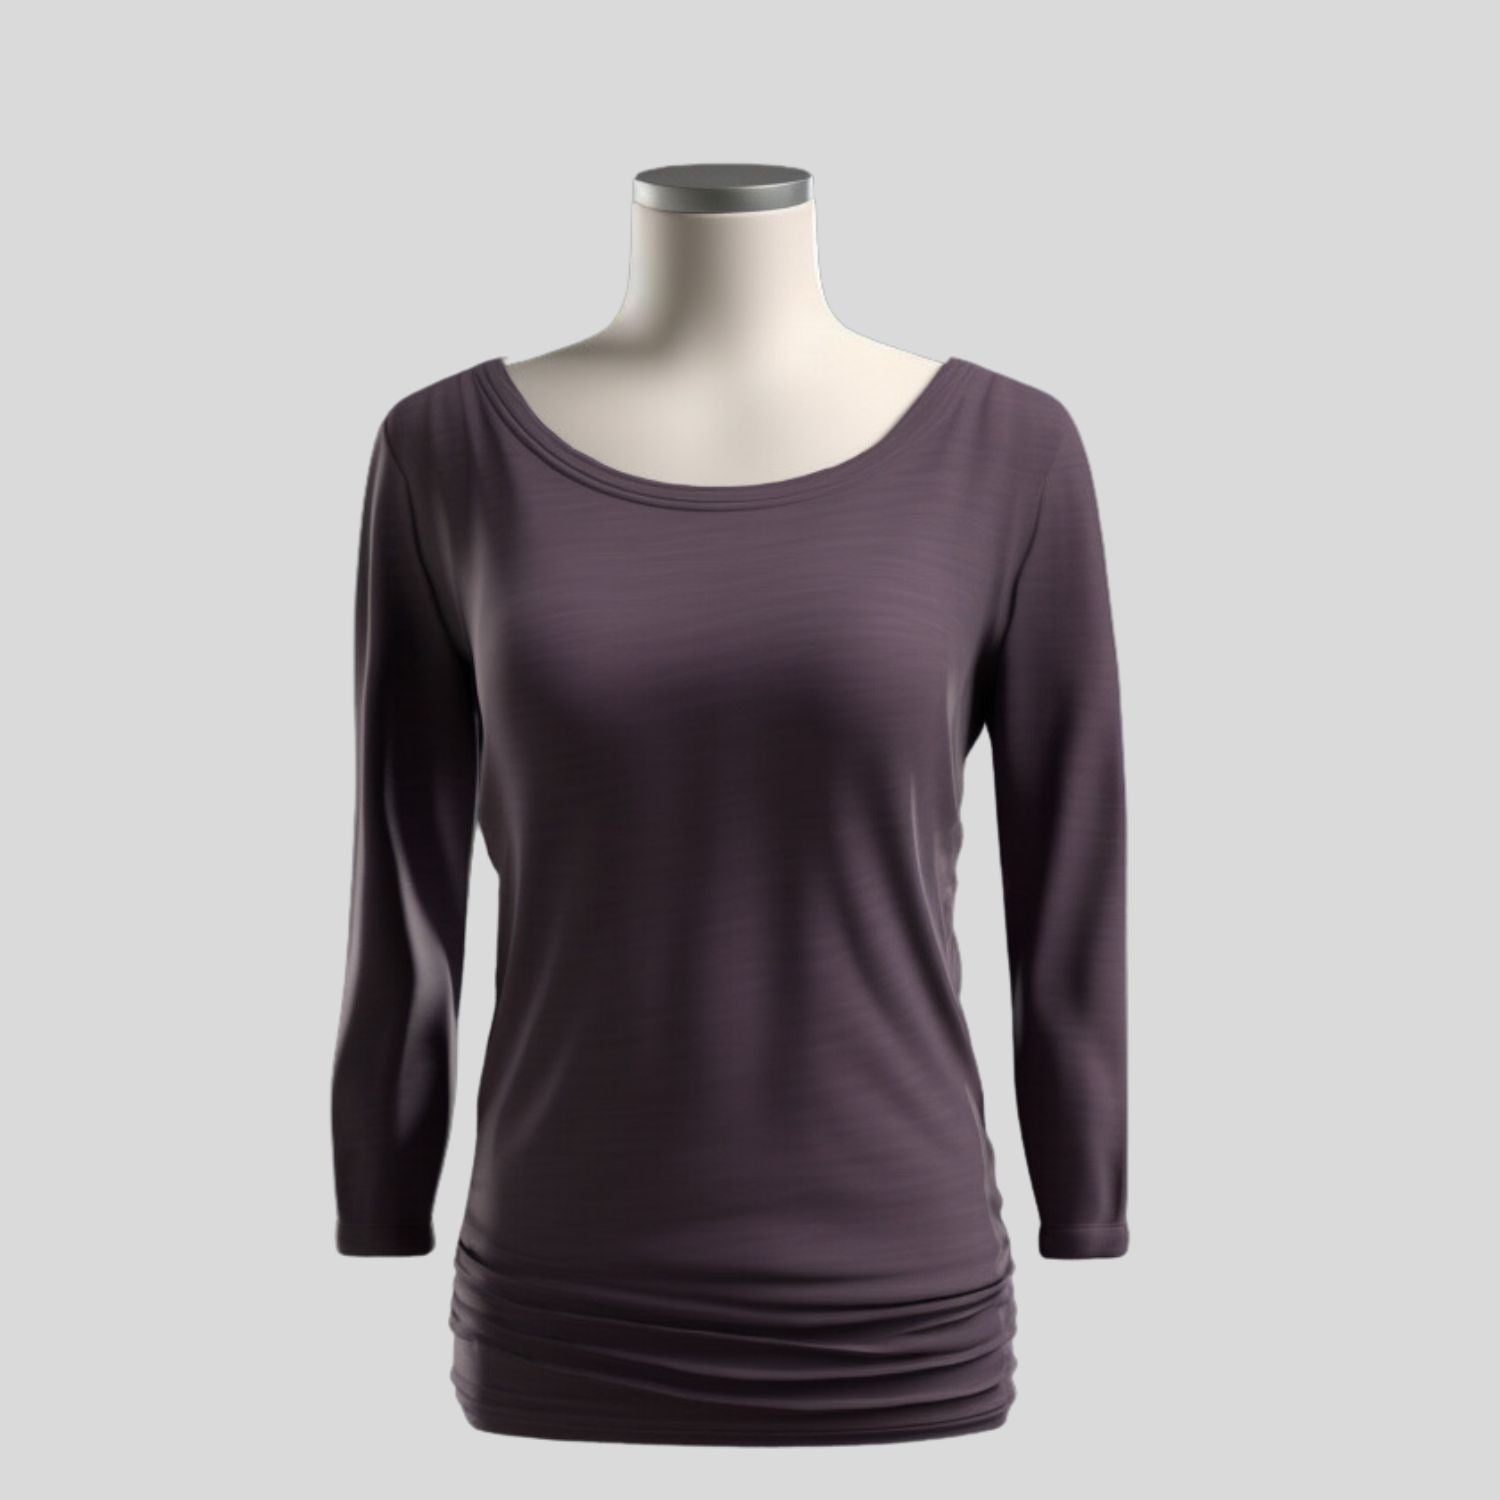 Made in Canada black dolman women's tops | Econica organic cotton clothing shop for women | 